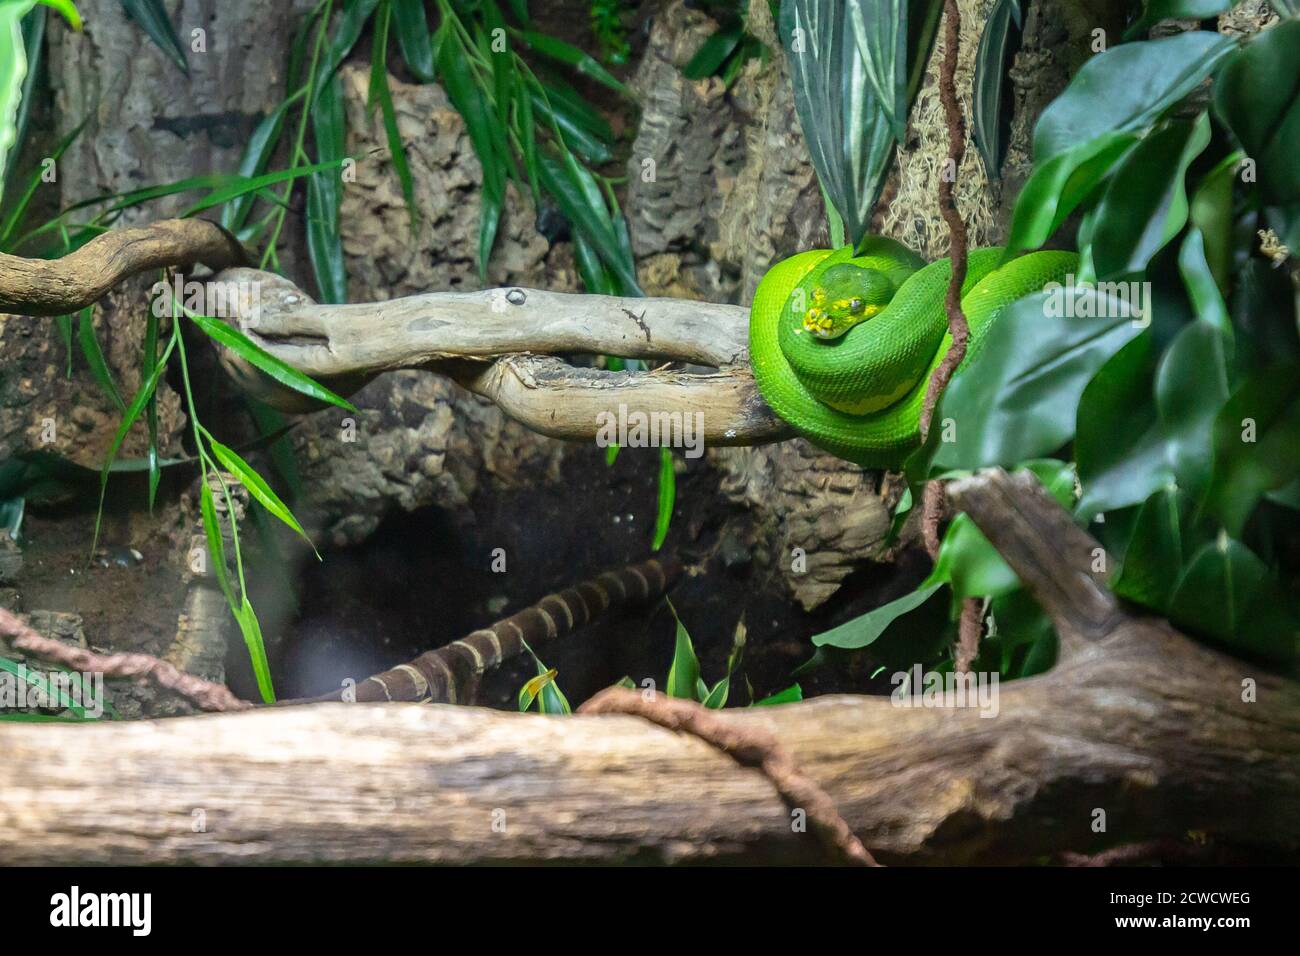 Oriental Whipsnake all curled up Stock Photo